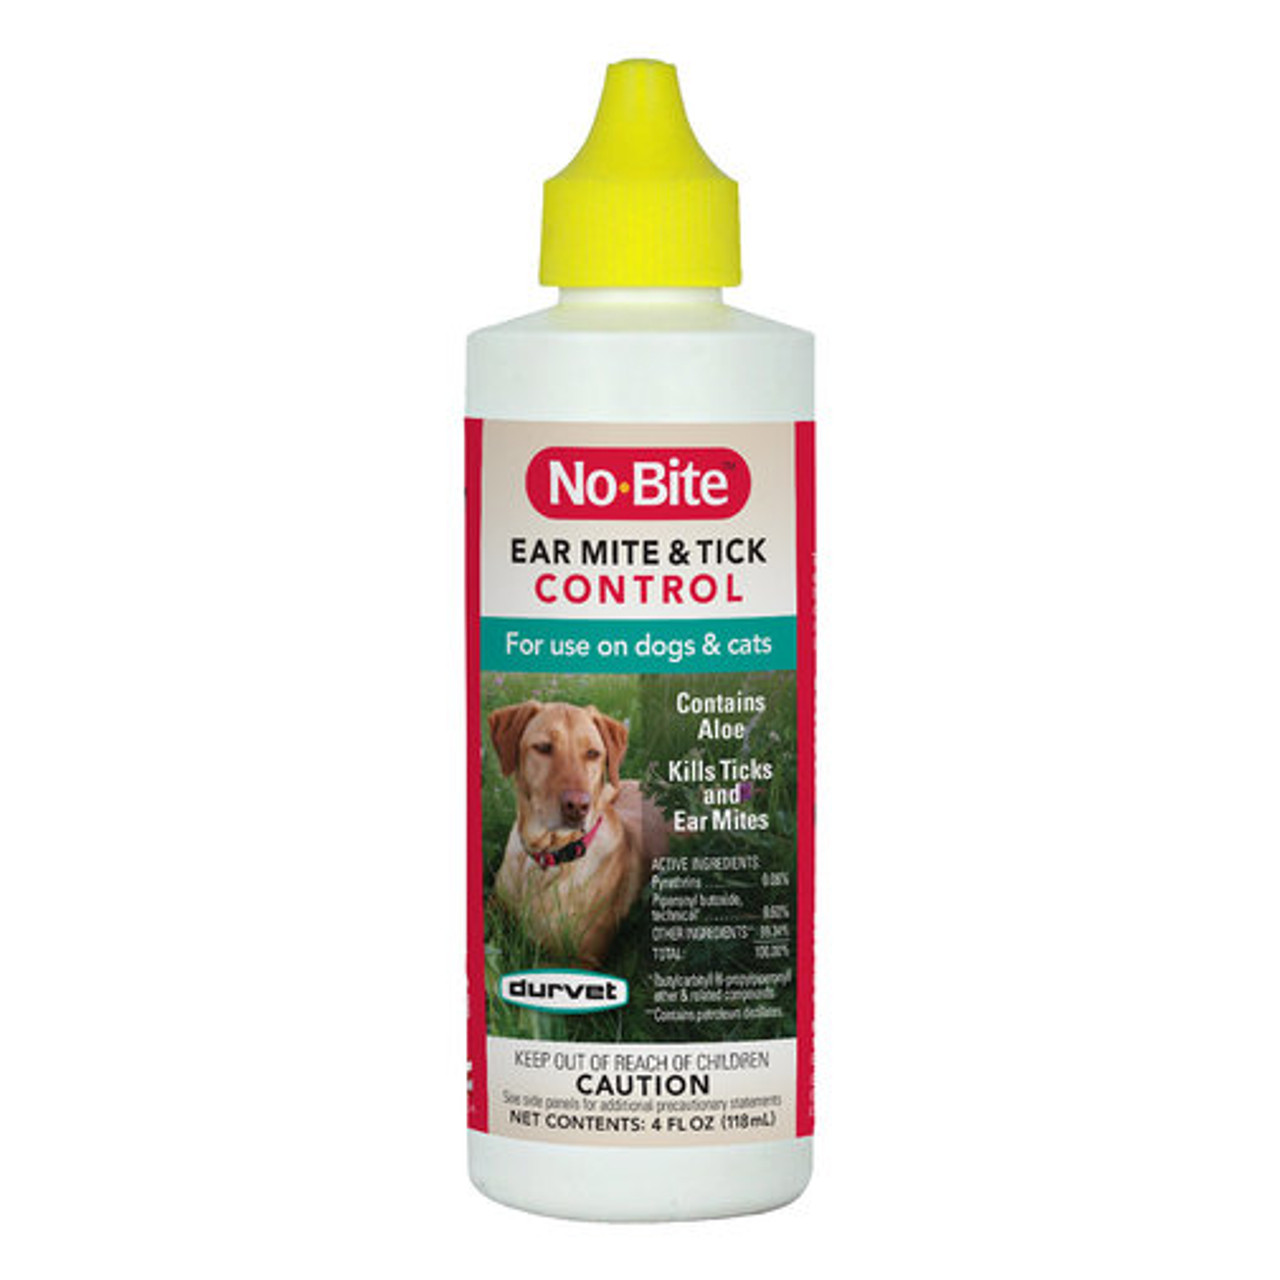 no bite ear mite oil based formula for dogs and cats at okie dog supply. 4 ounce bottle.